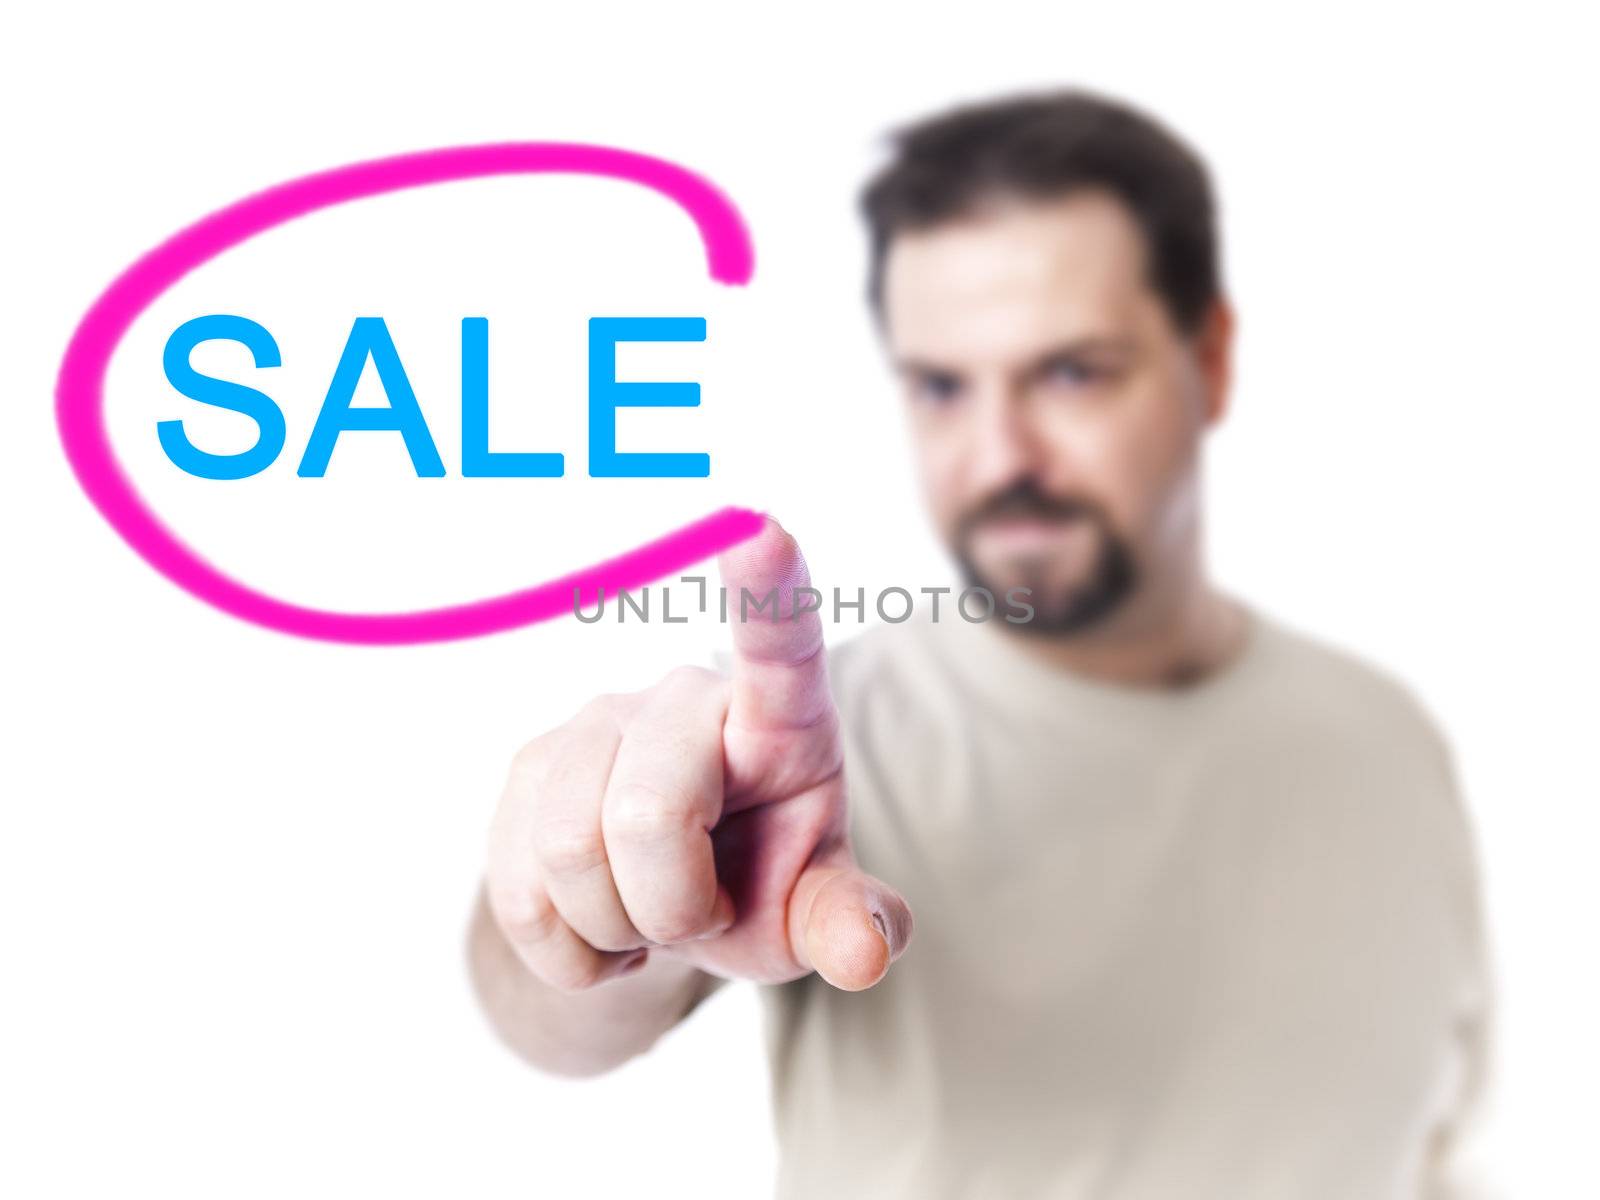 An image of a nice man pointing to a sale sign